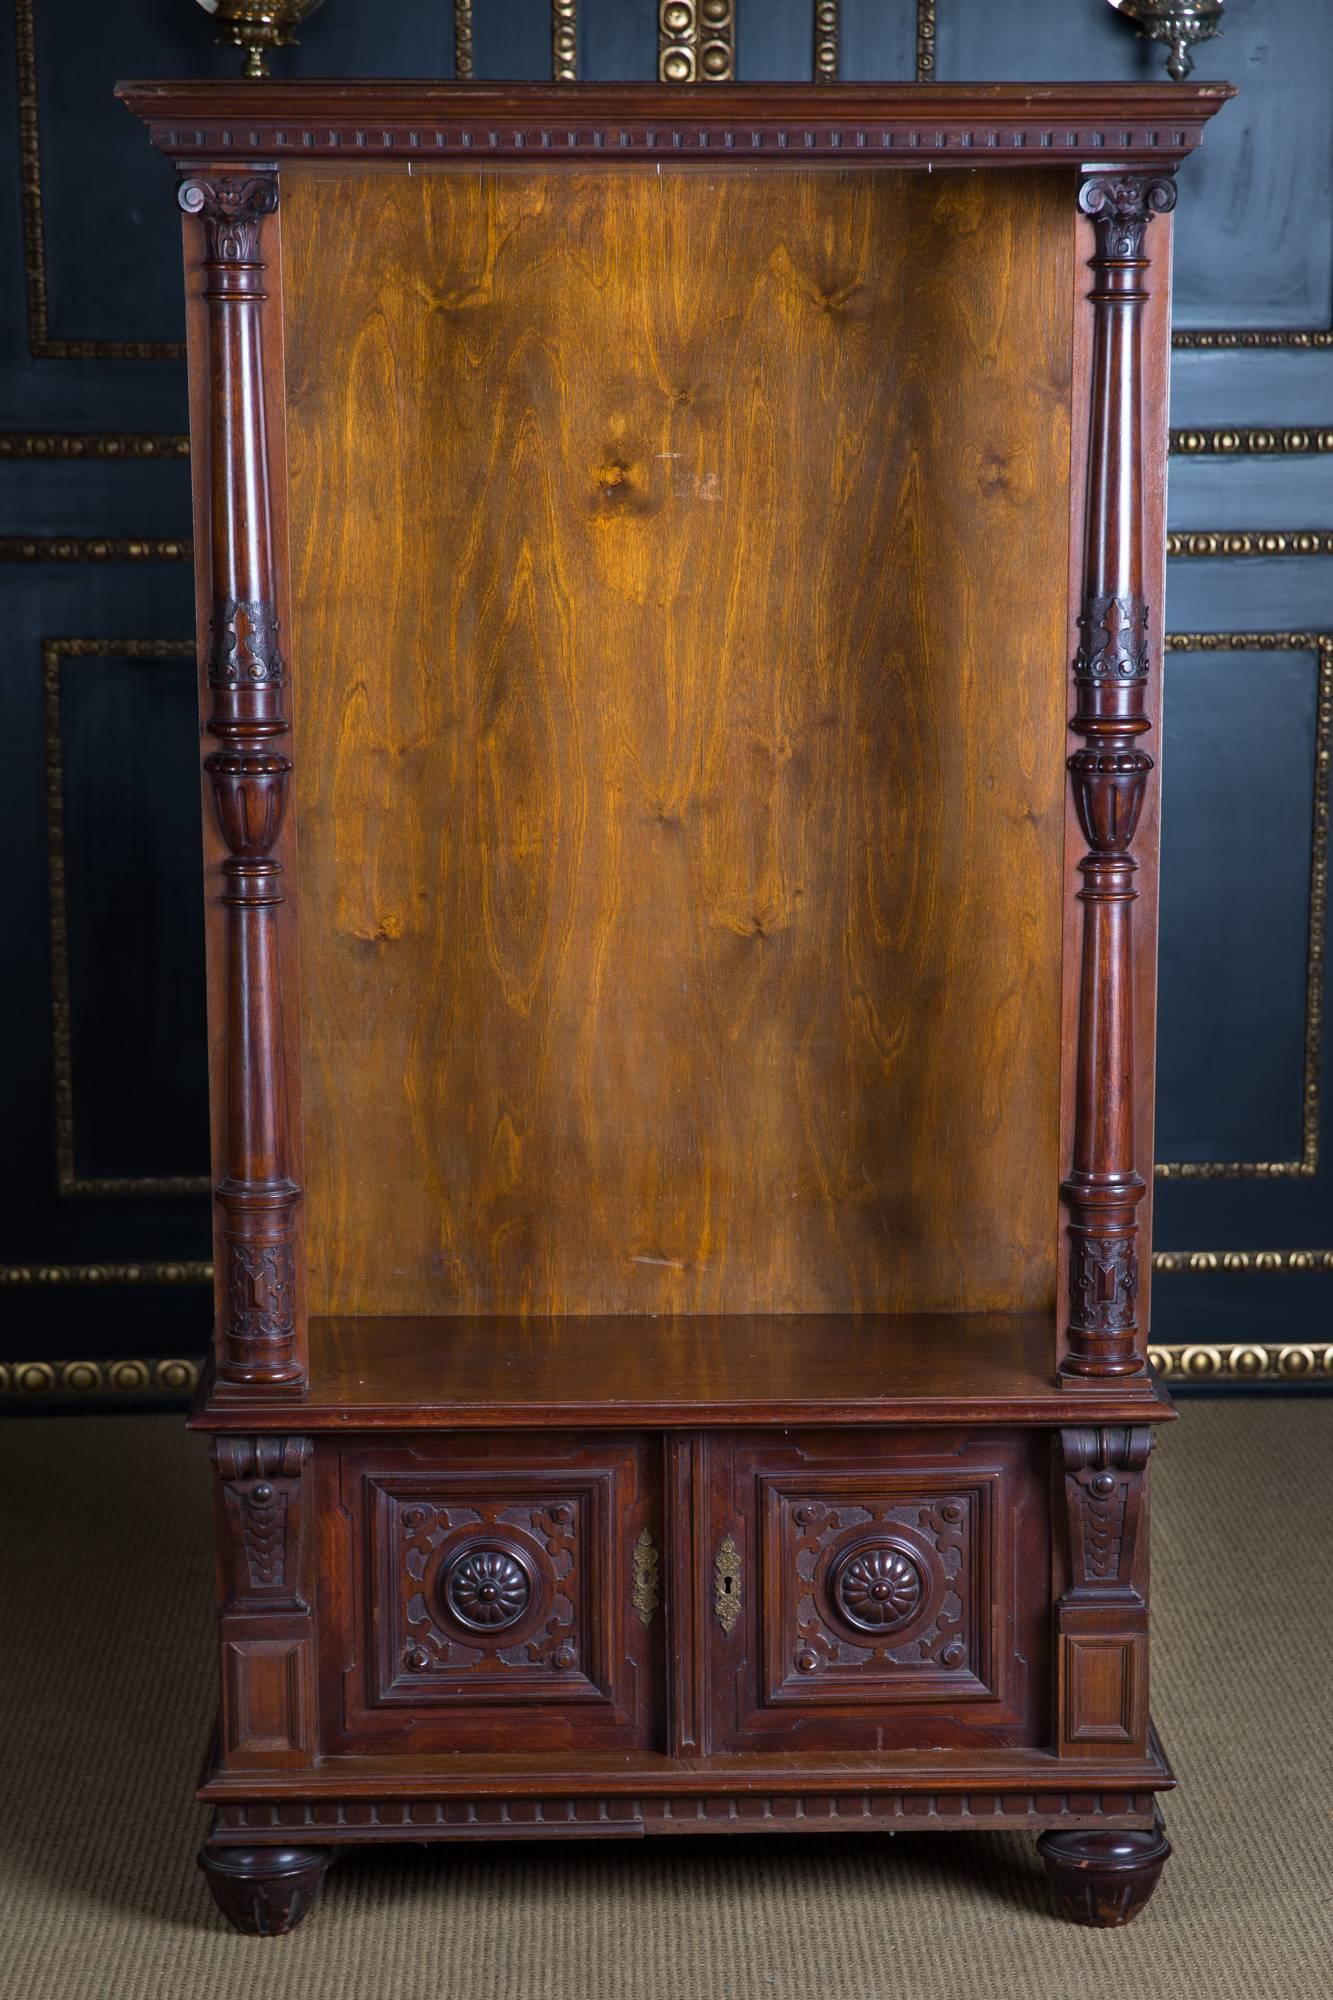 High-rectangular body on pressed ball feet. Above open, flanked by three-quarter carved columns. Including two fully carved doors.

The wardrobe was once a showcase, converted into an open showcase.

Originates from a Berlin estate.

Excellent